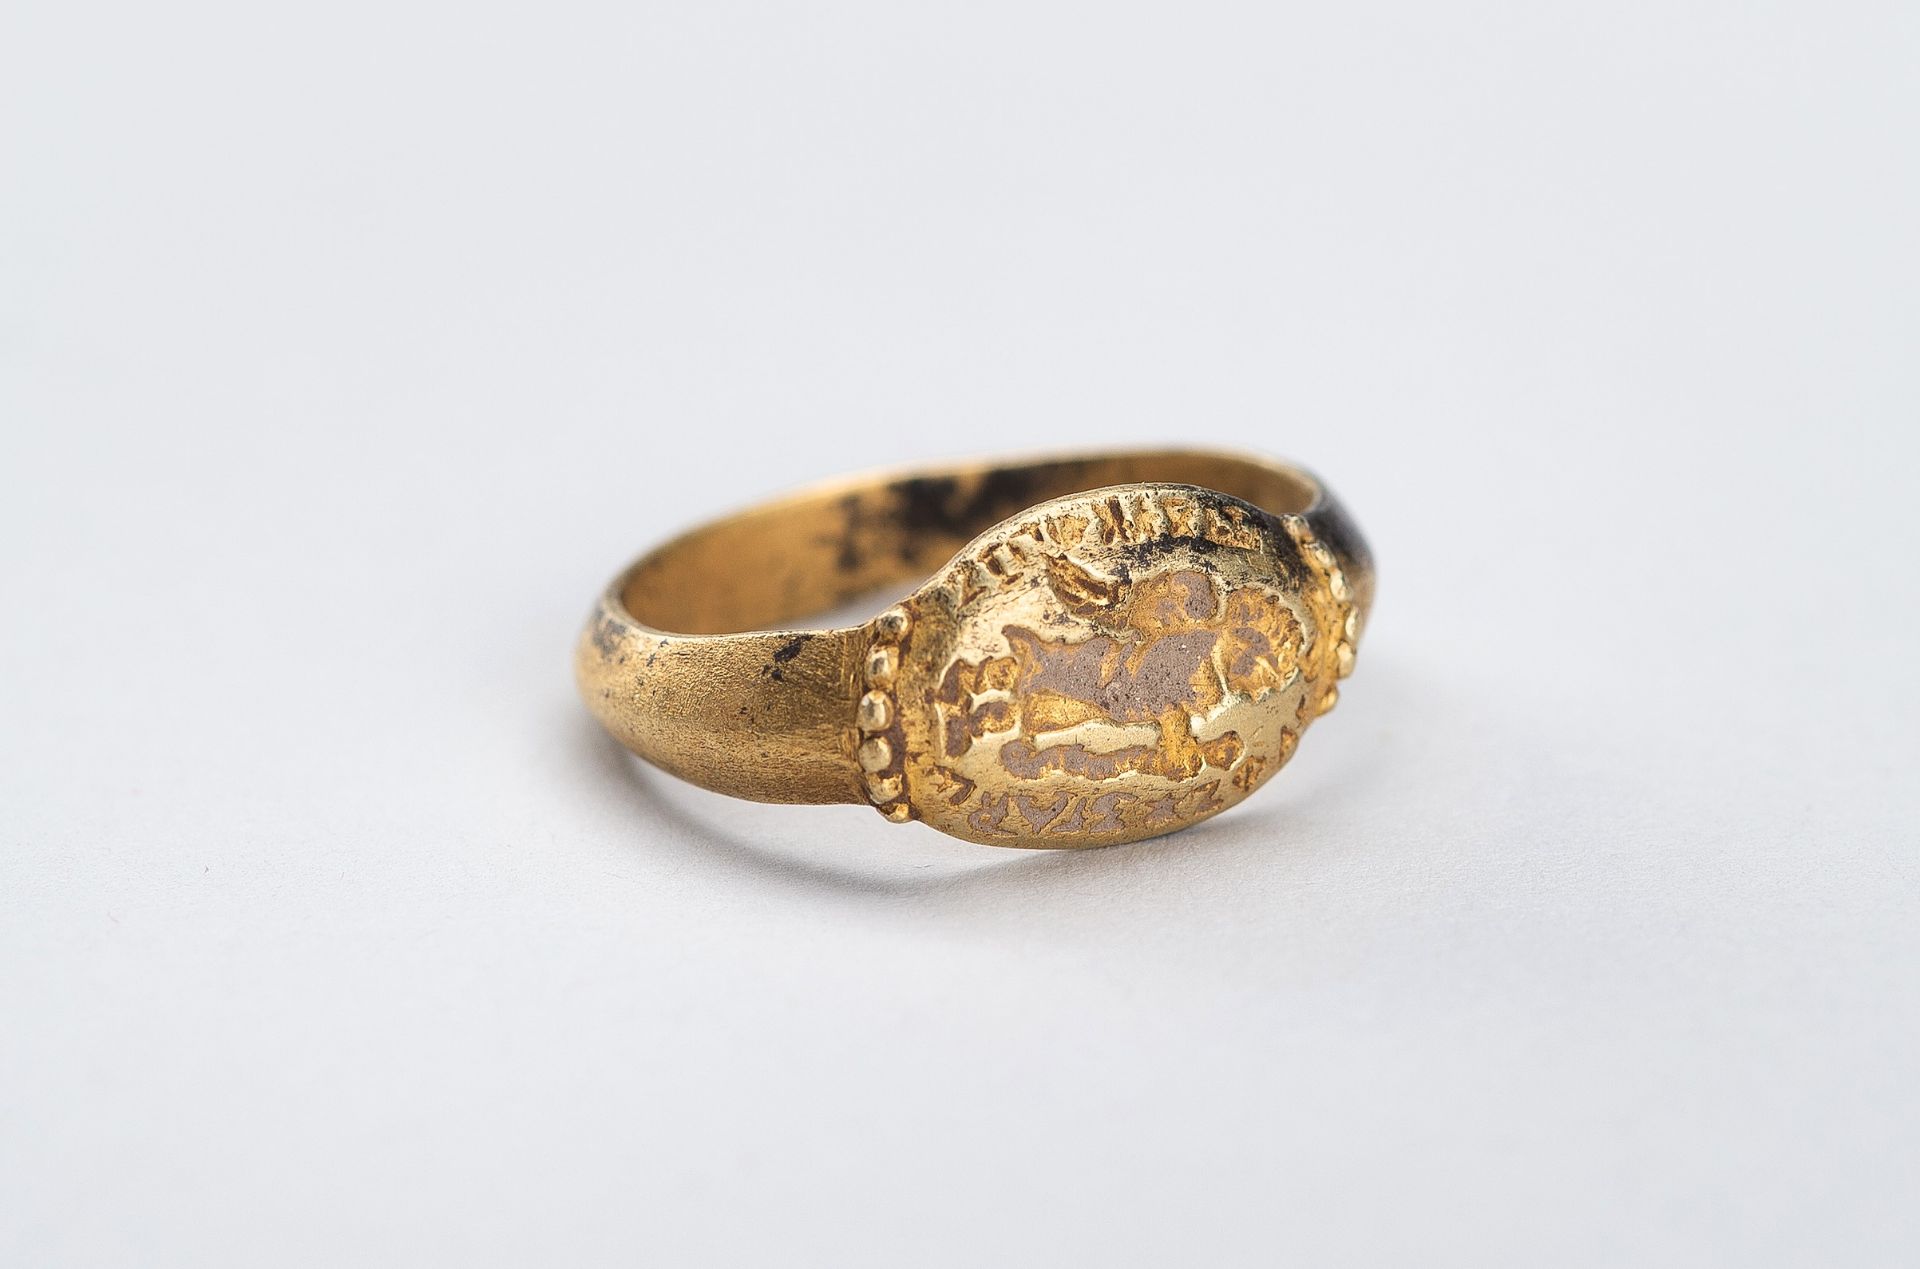 AN ANCIENT BACTRIAN GOLD SEAL RING